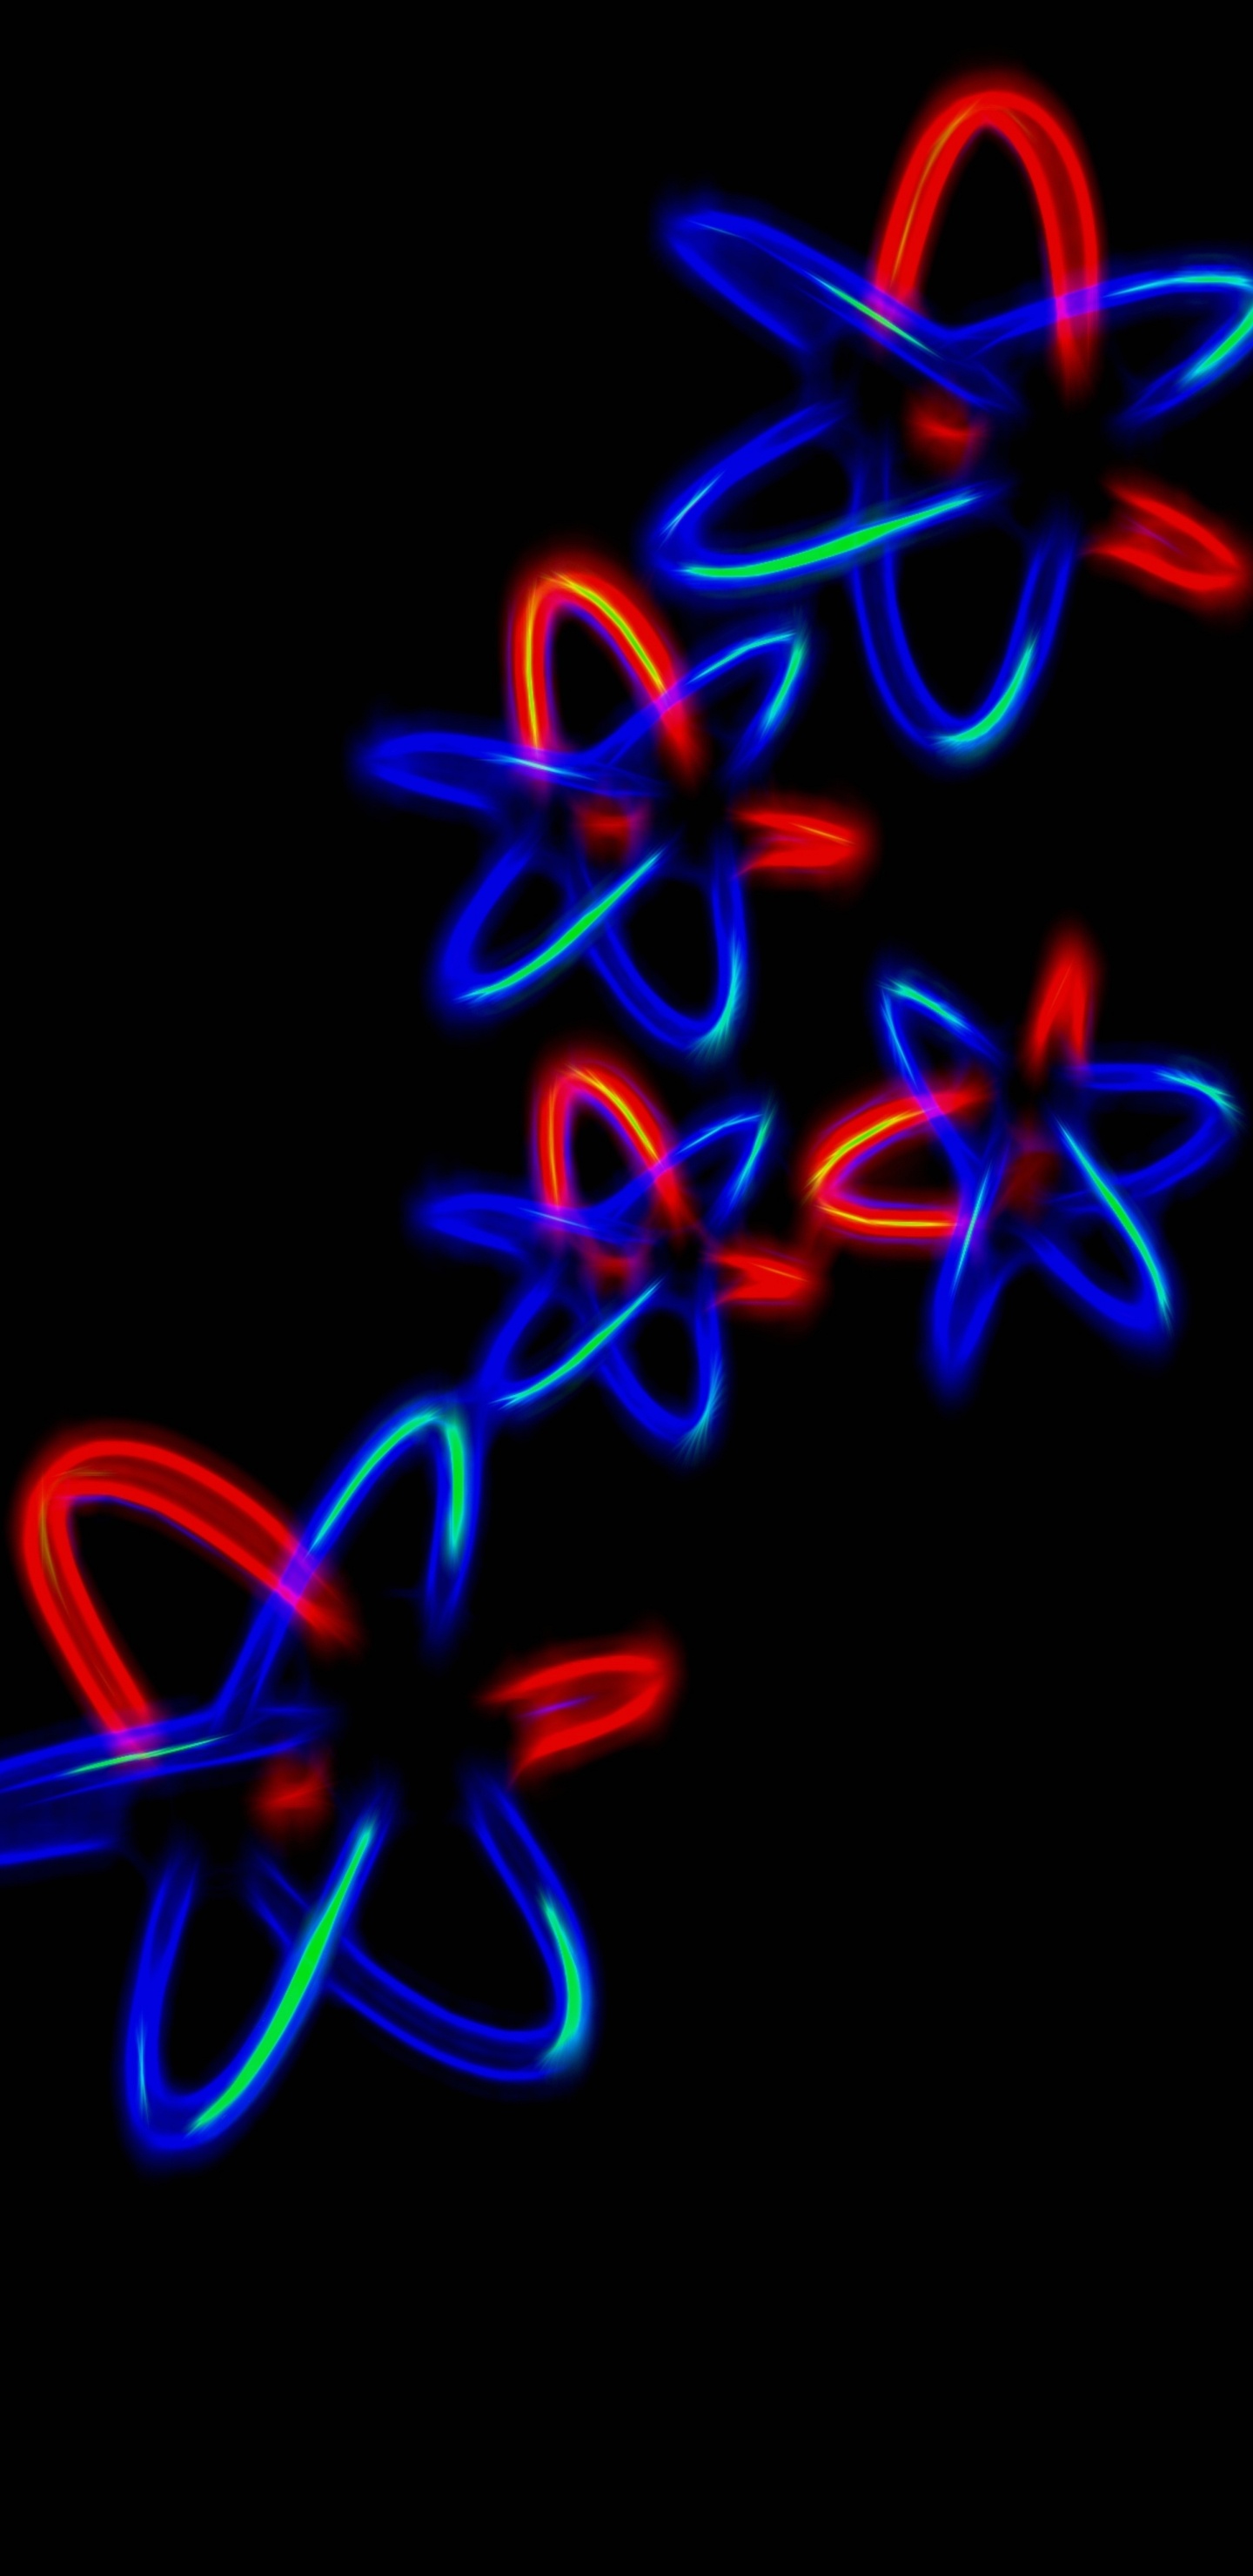 Red Blue and Yellow Abstract Illustration. Wallpaper in 1440x2960 Resolution